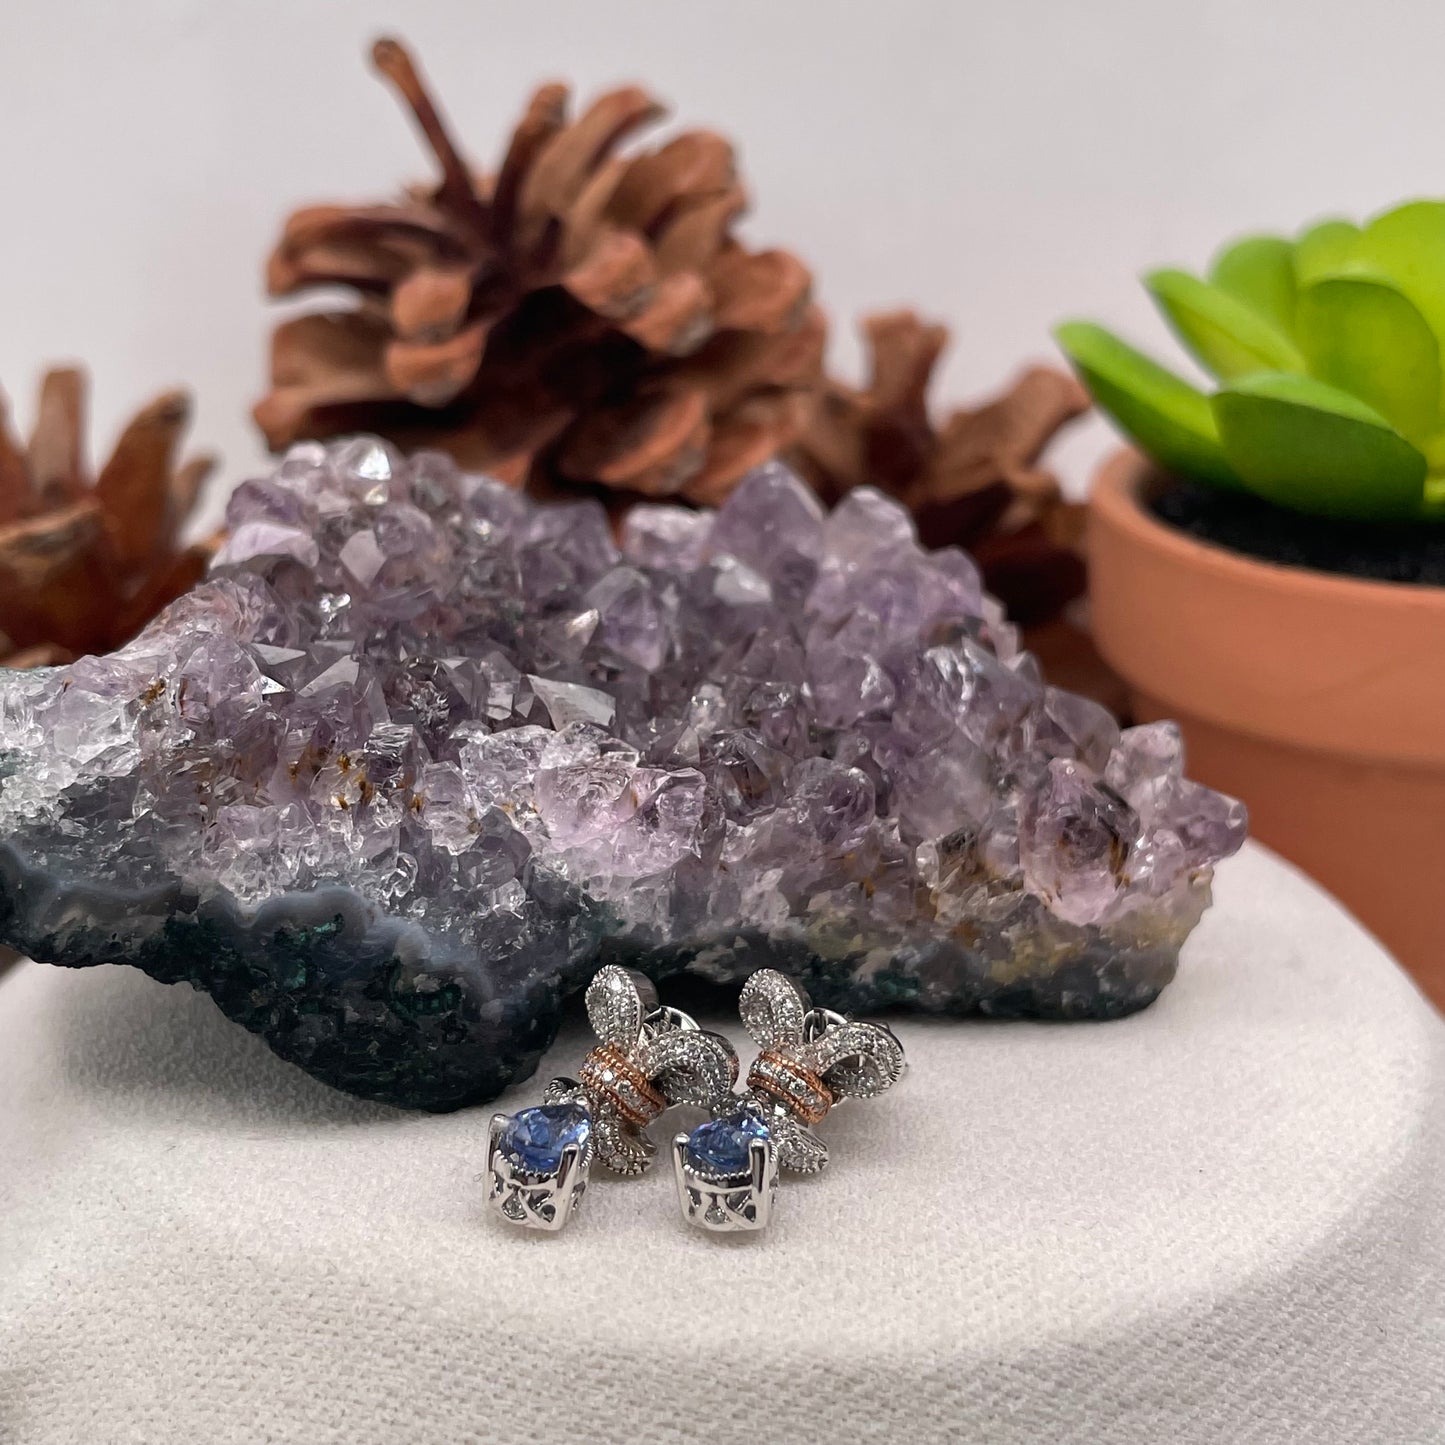 14K White Gold Sapphire Earrings with Diamond